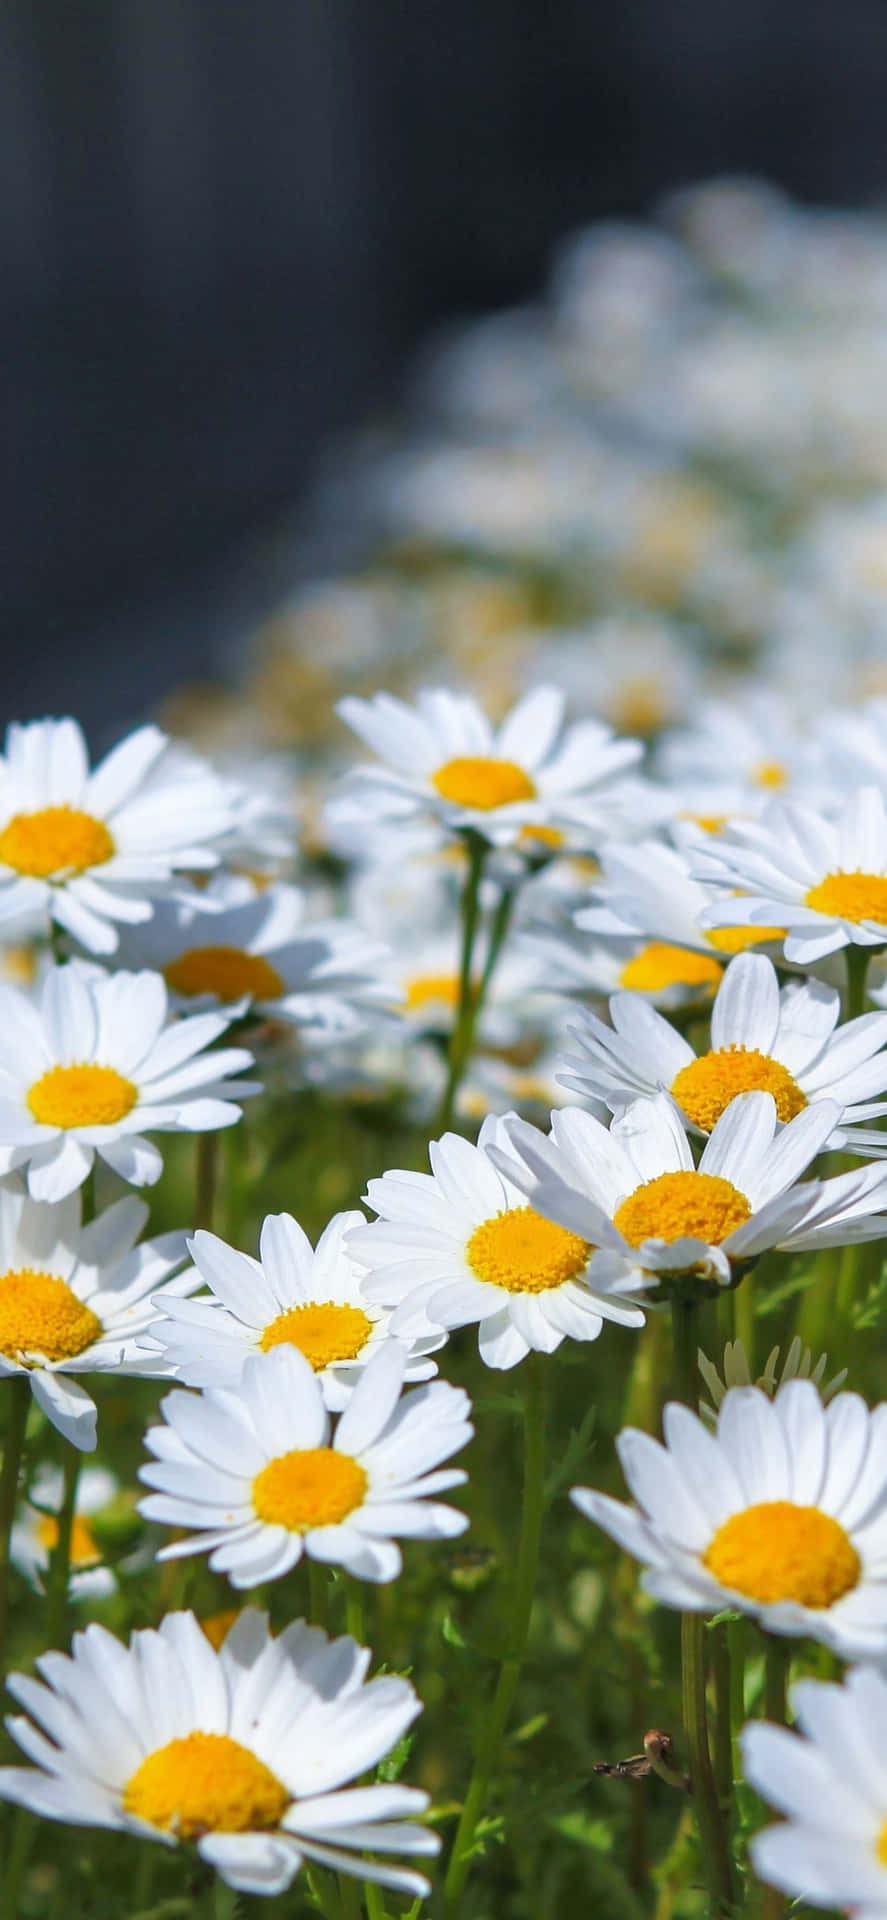 Bright sunshine and the beauty of a daisy Wallpaper